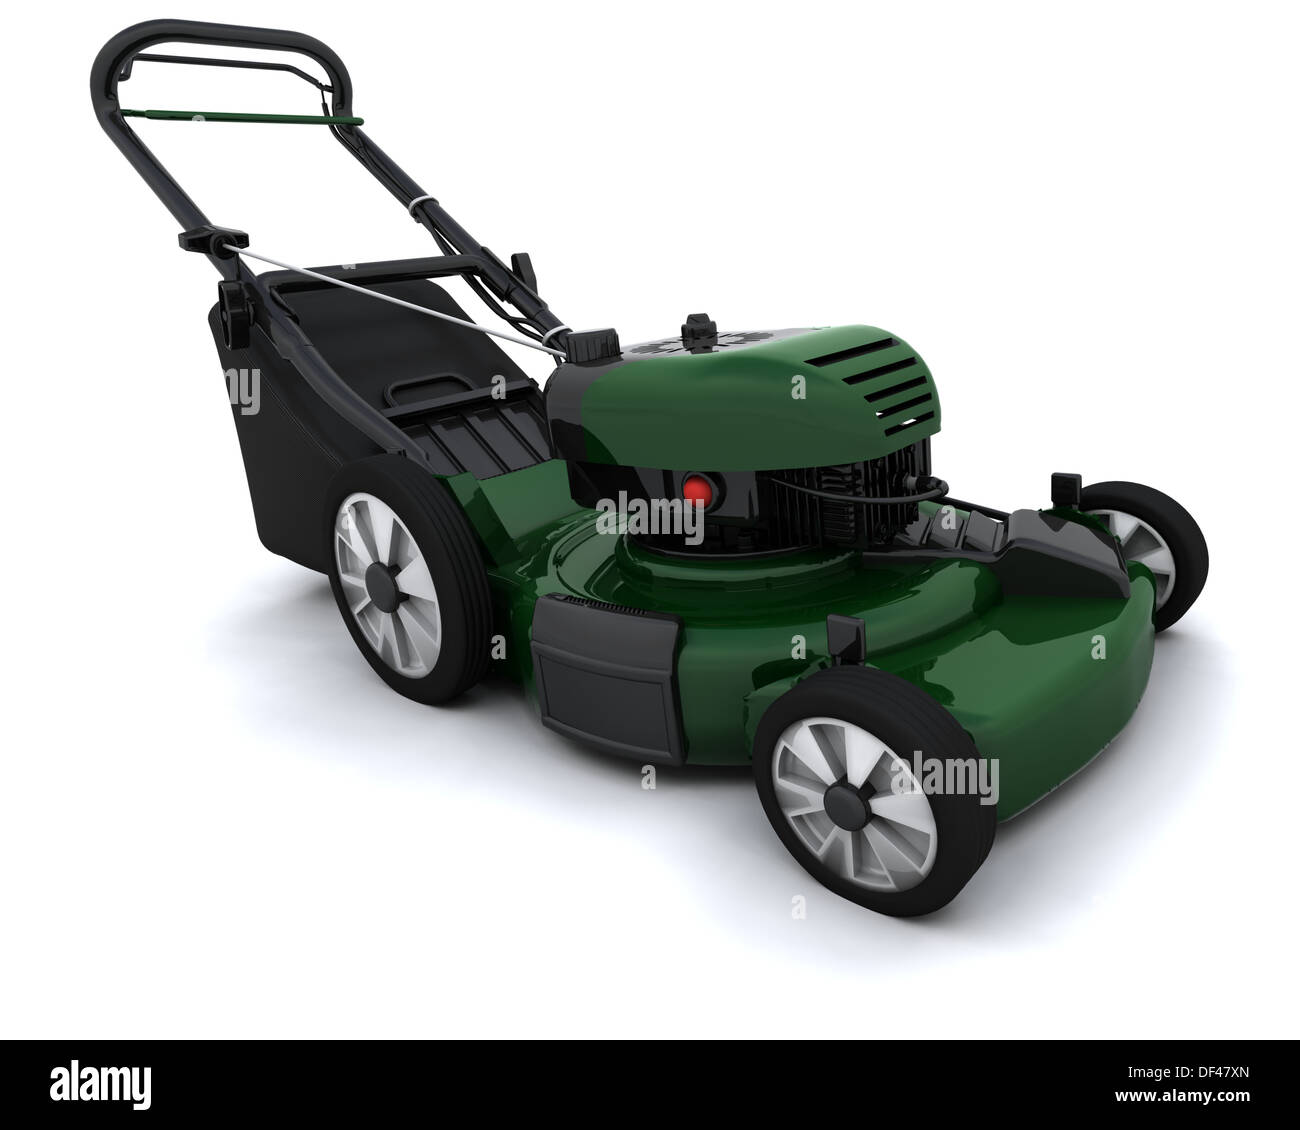 3D render of a lawn mower Stock Photo